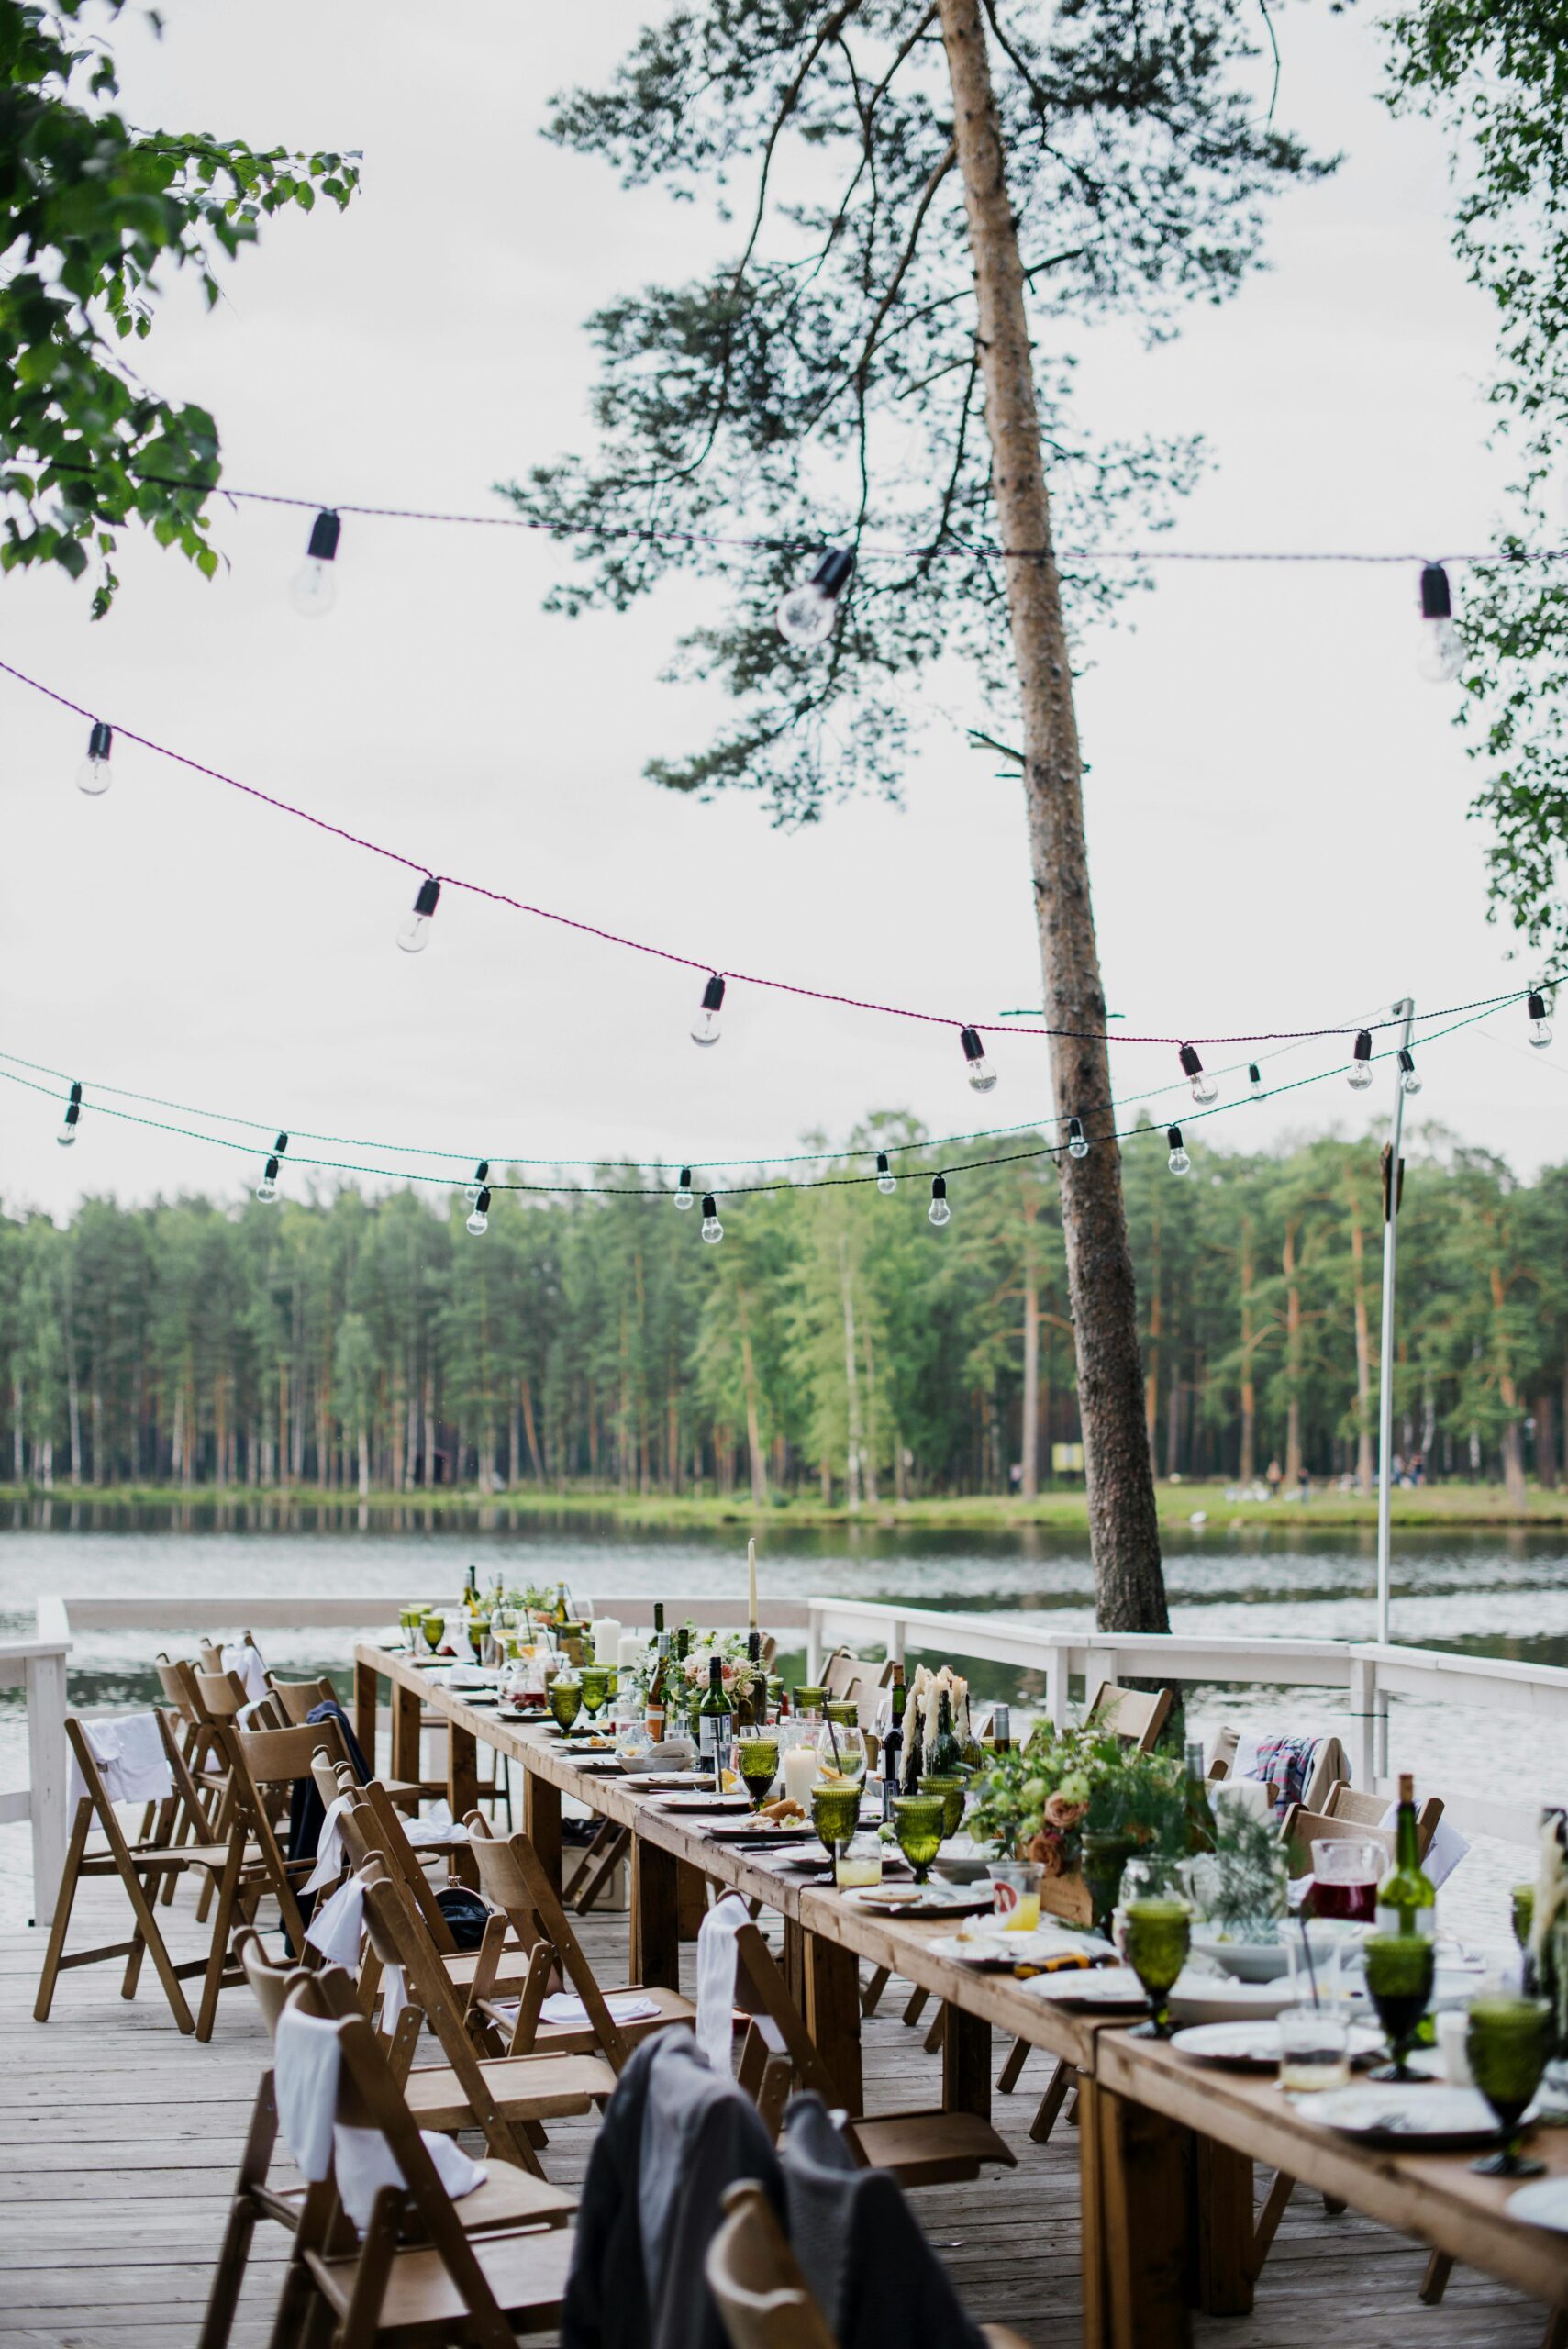 A table adorned with reusable decorations at outdoor wedding